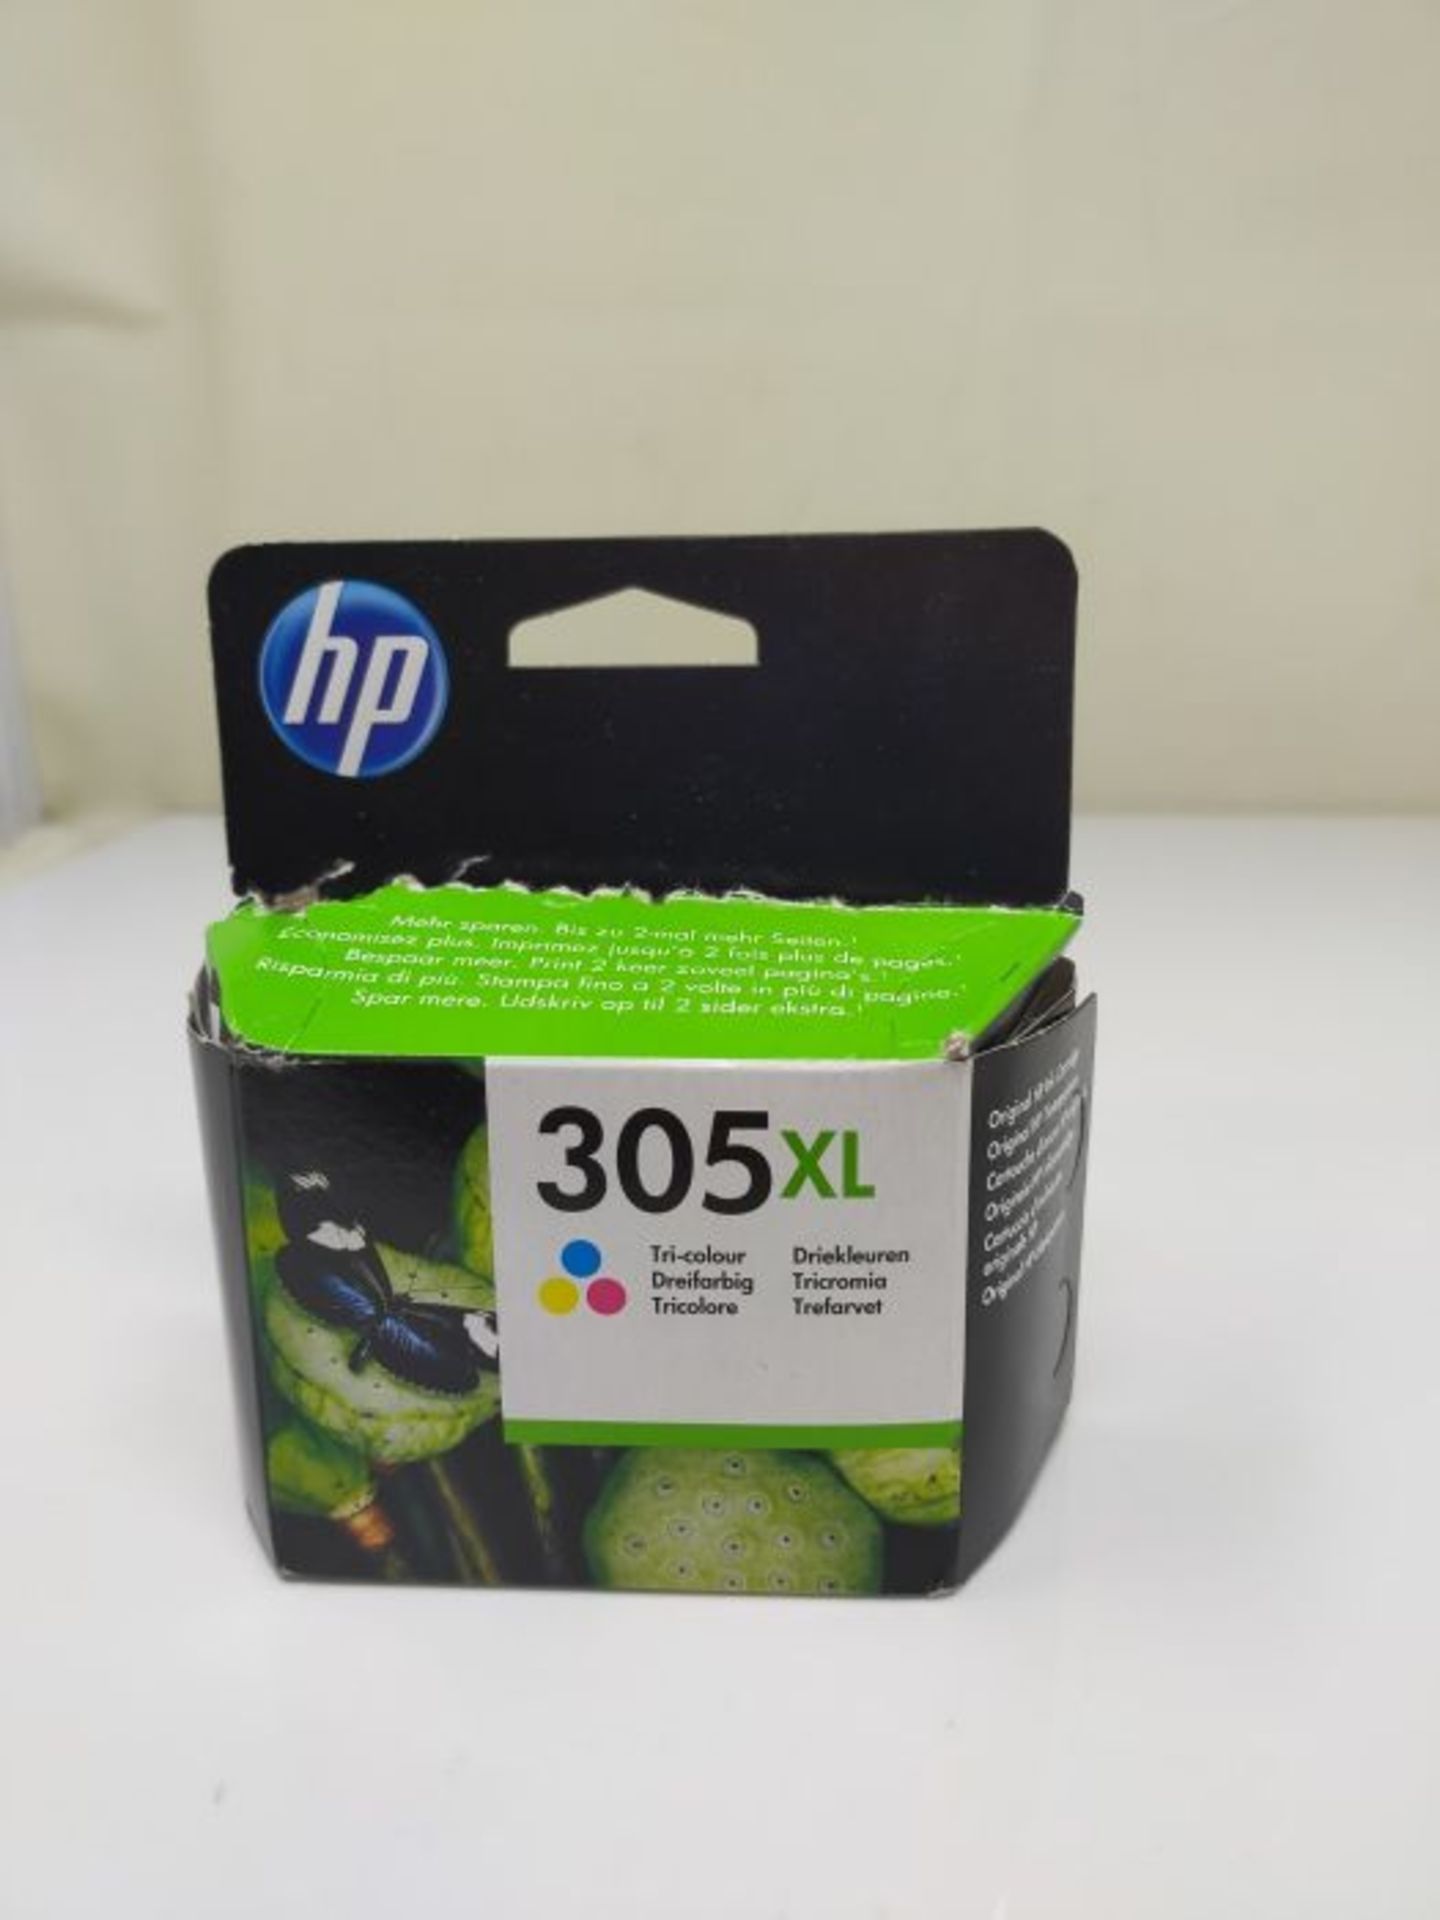 [CRACKED] HP 3YM63AE 305XL High Yield Original Ink Cartridge, Tri-color, Single Pack - Image 2 of 3